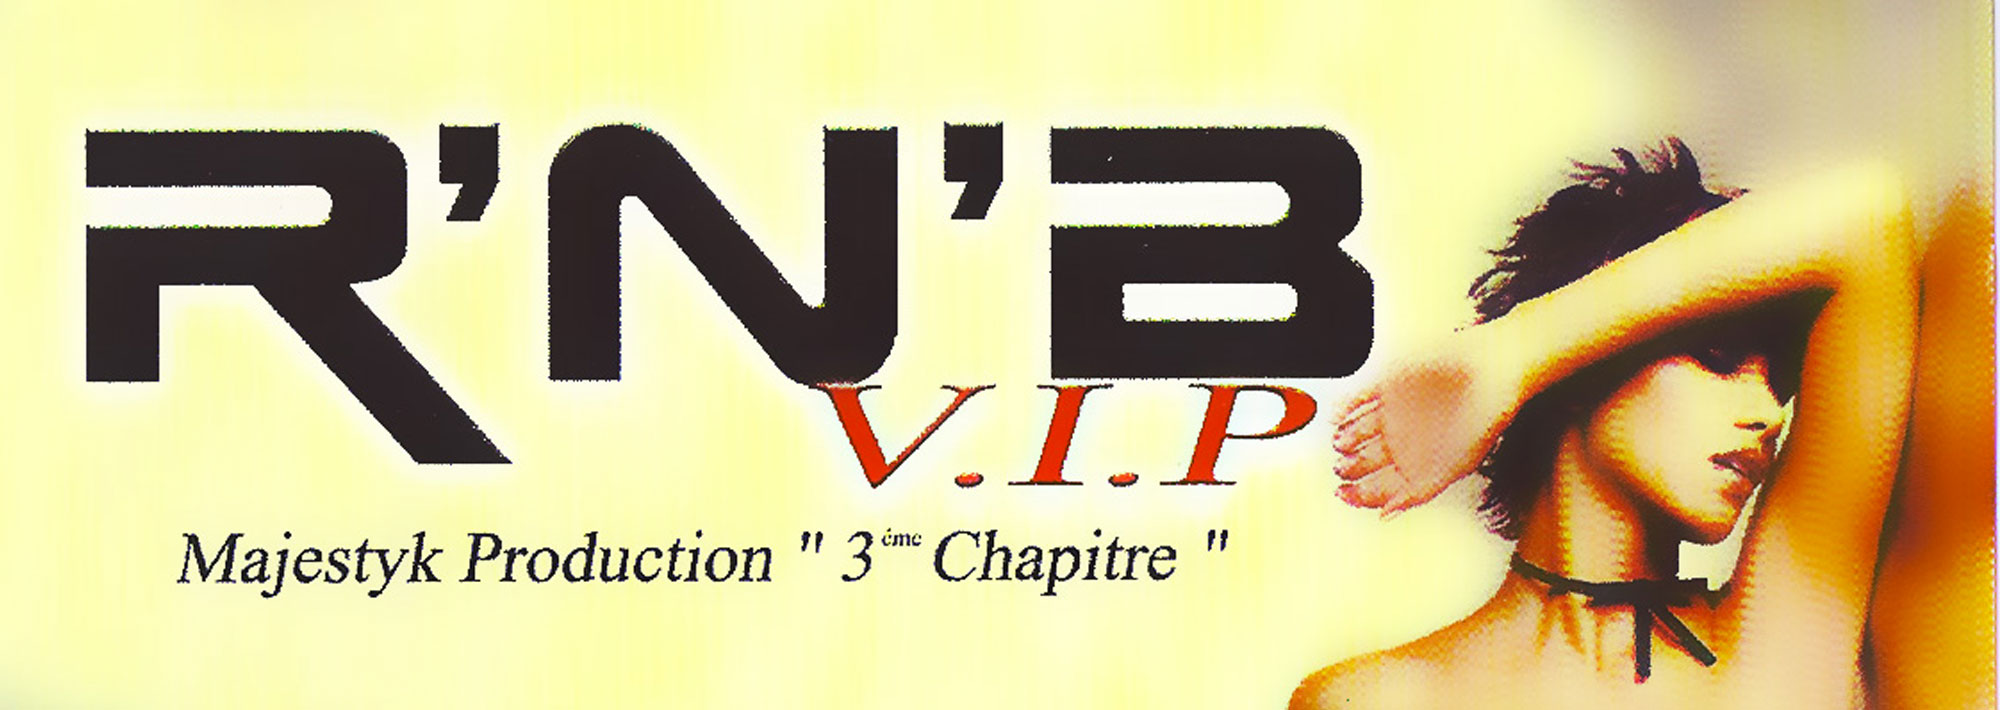 RnB VIP by T.Boon